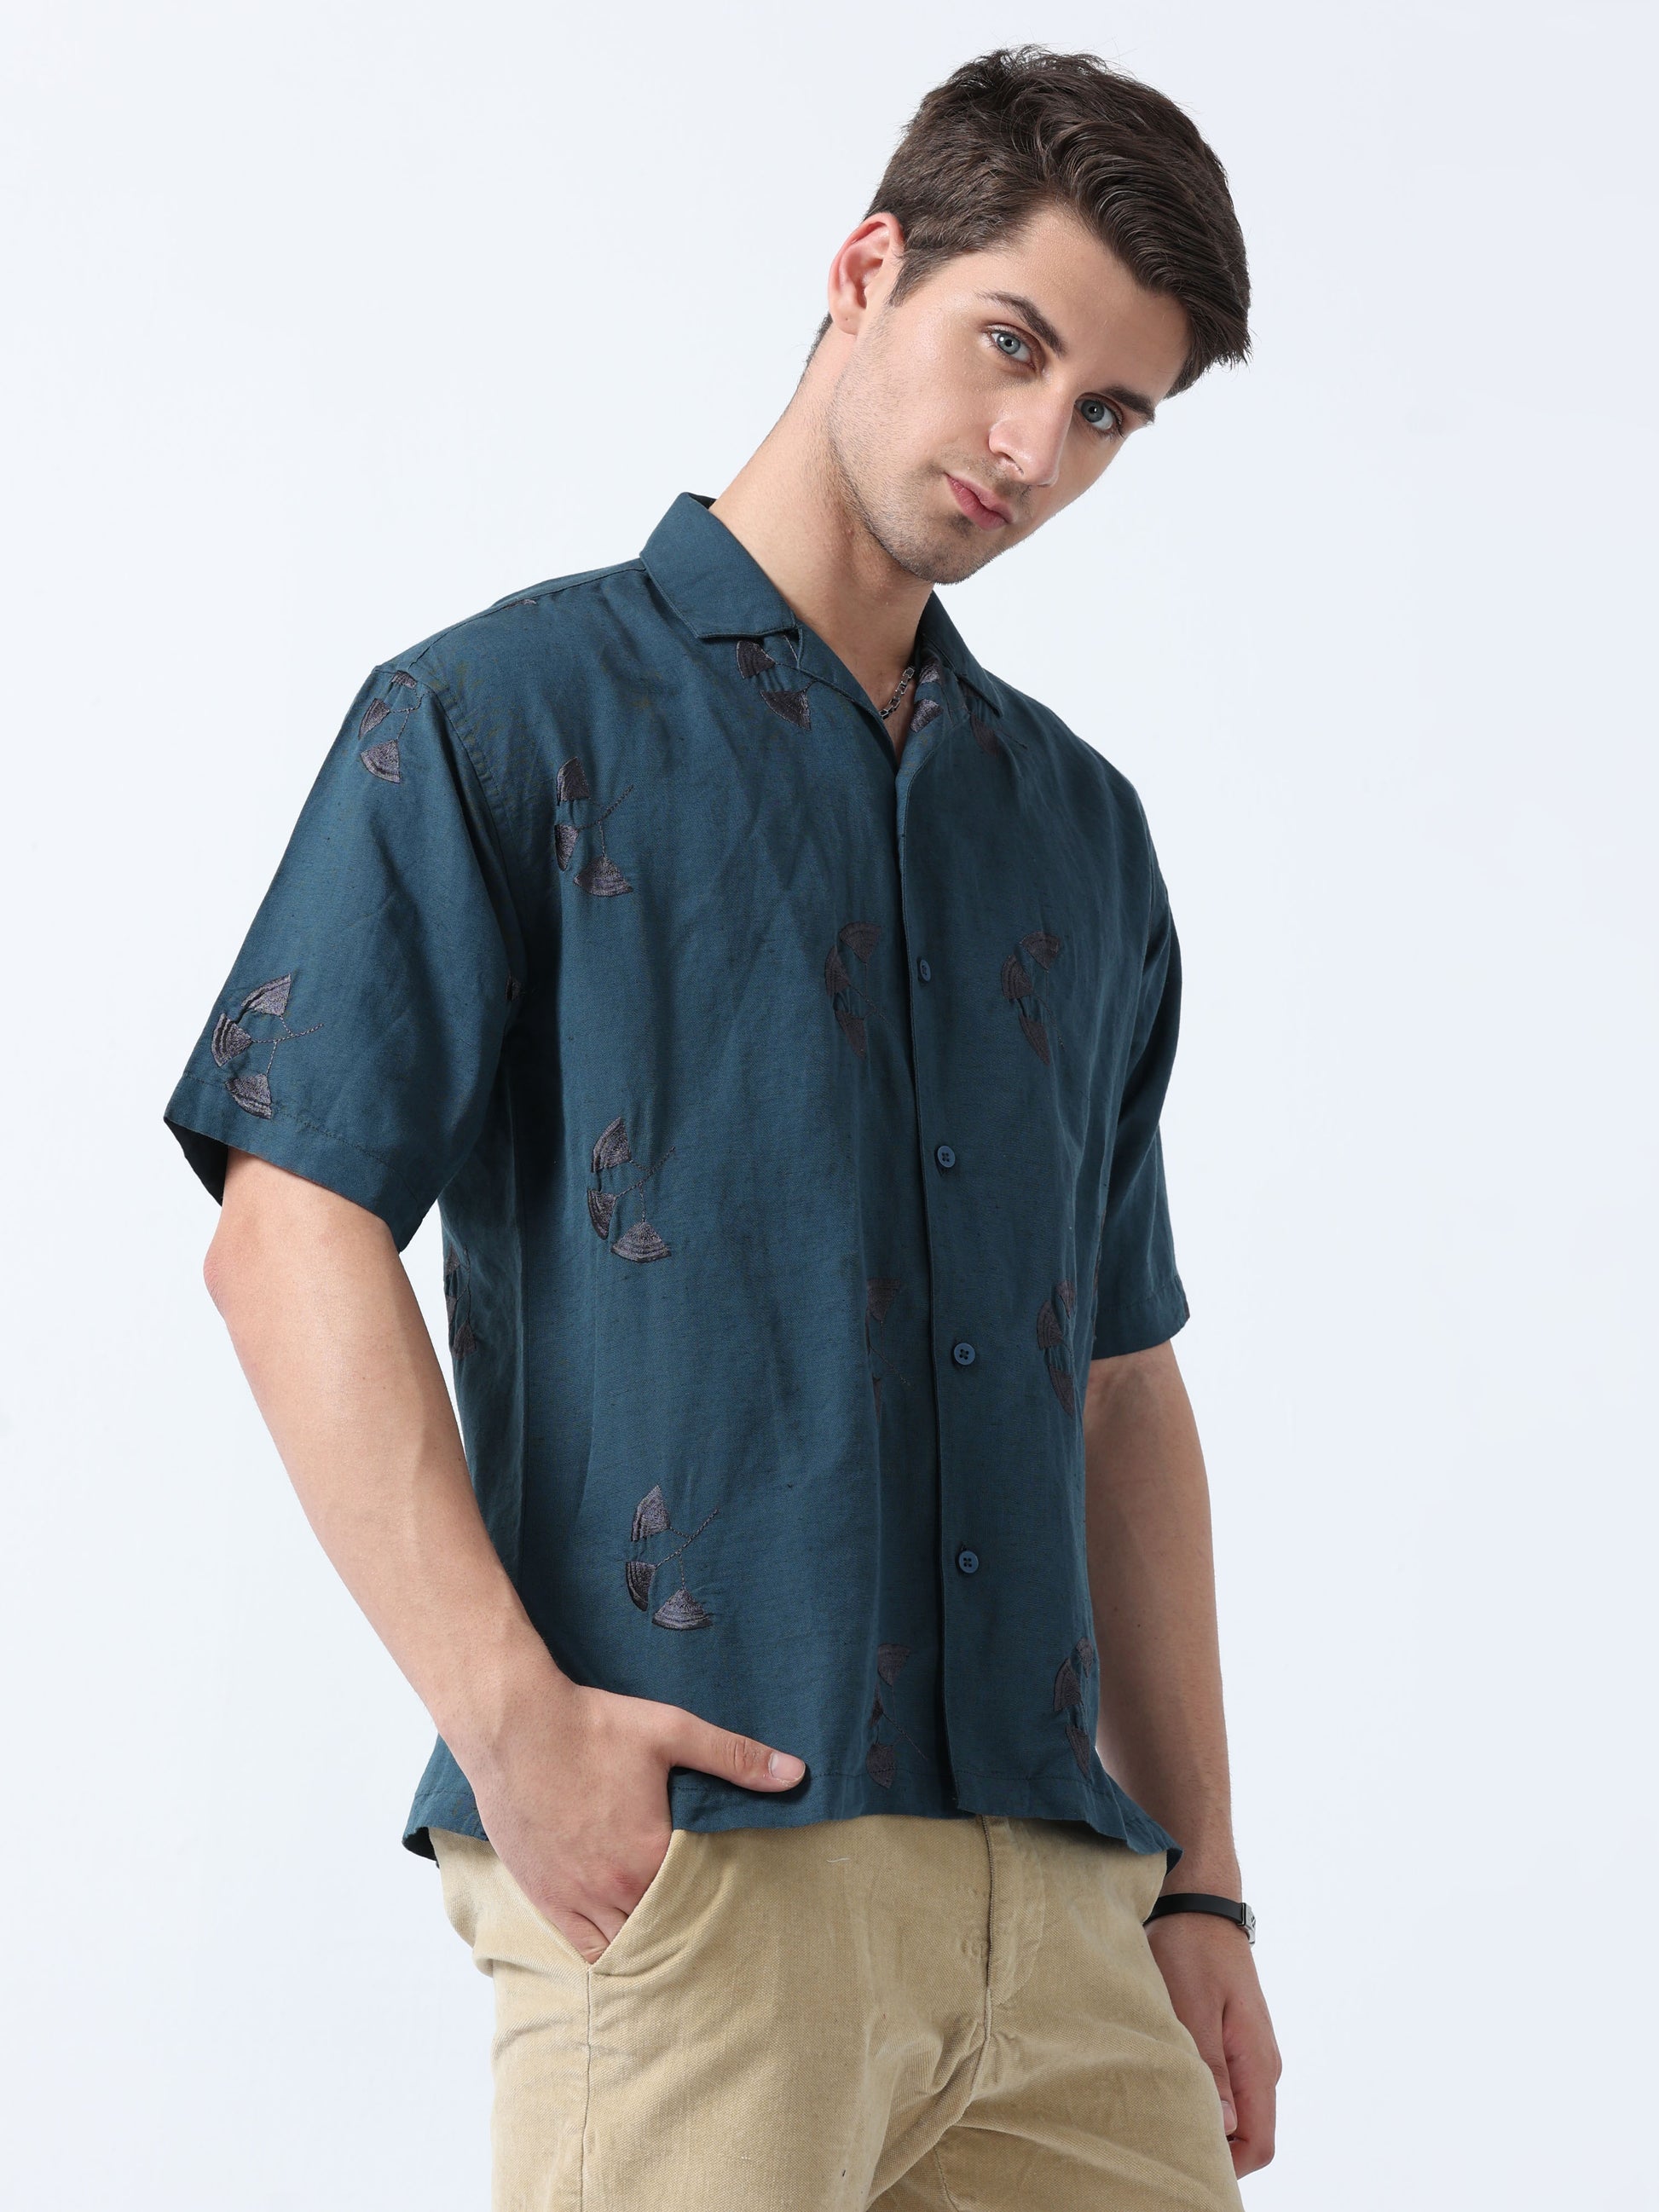 Teal Loose Fit Half Sleeve Embroidered Men's Shirt